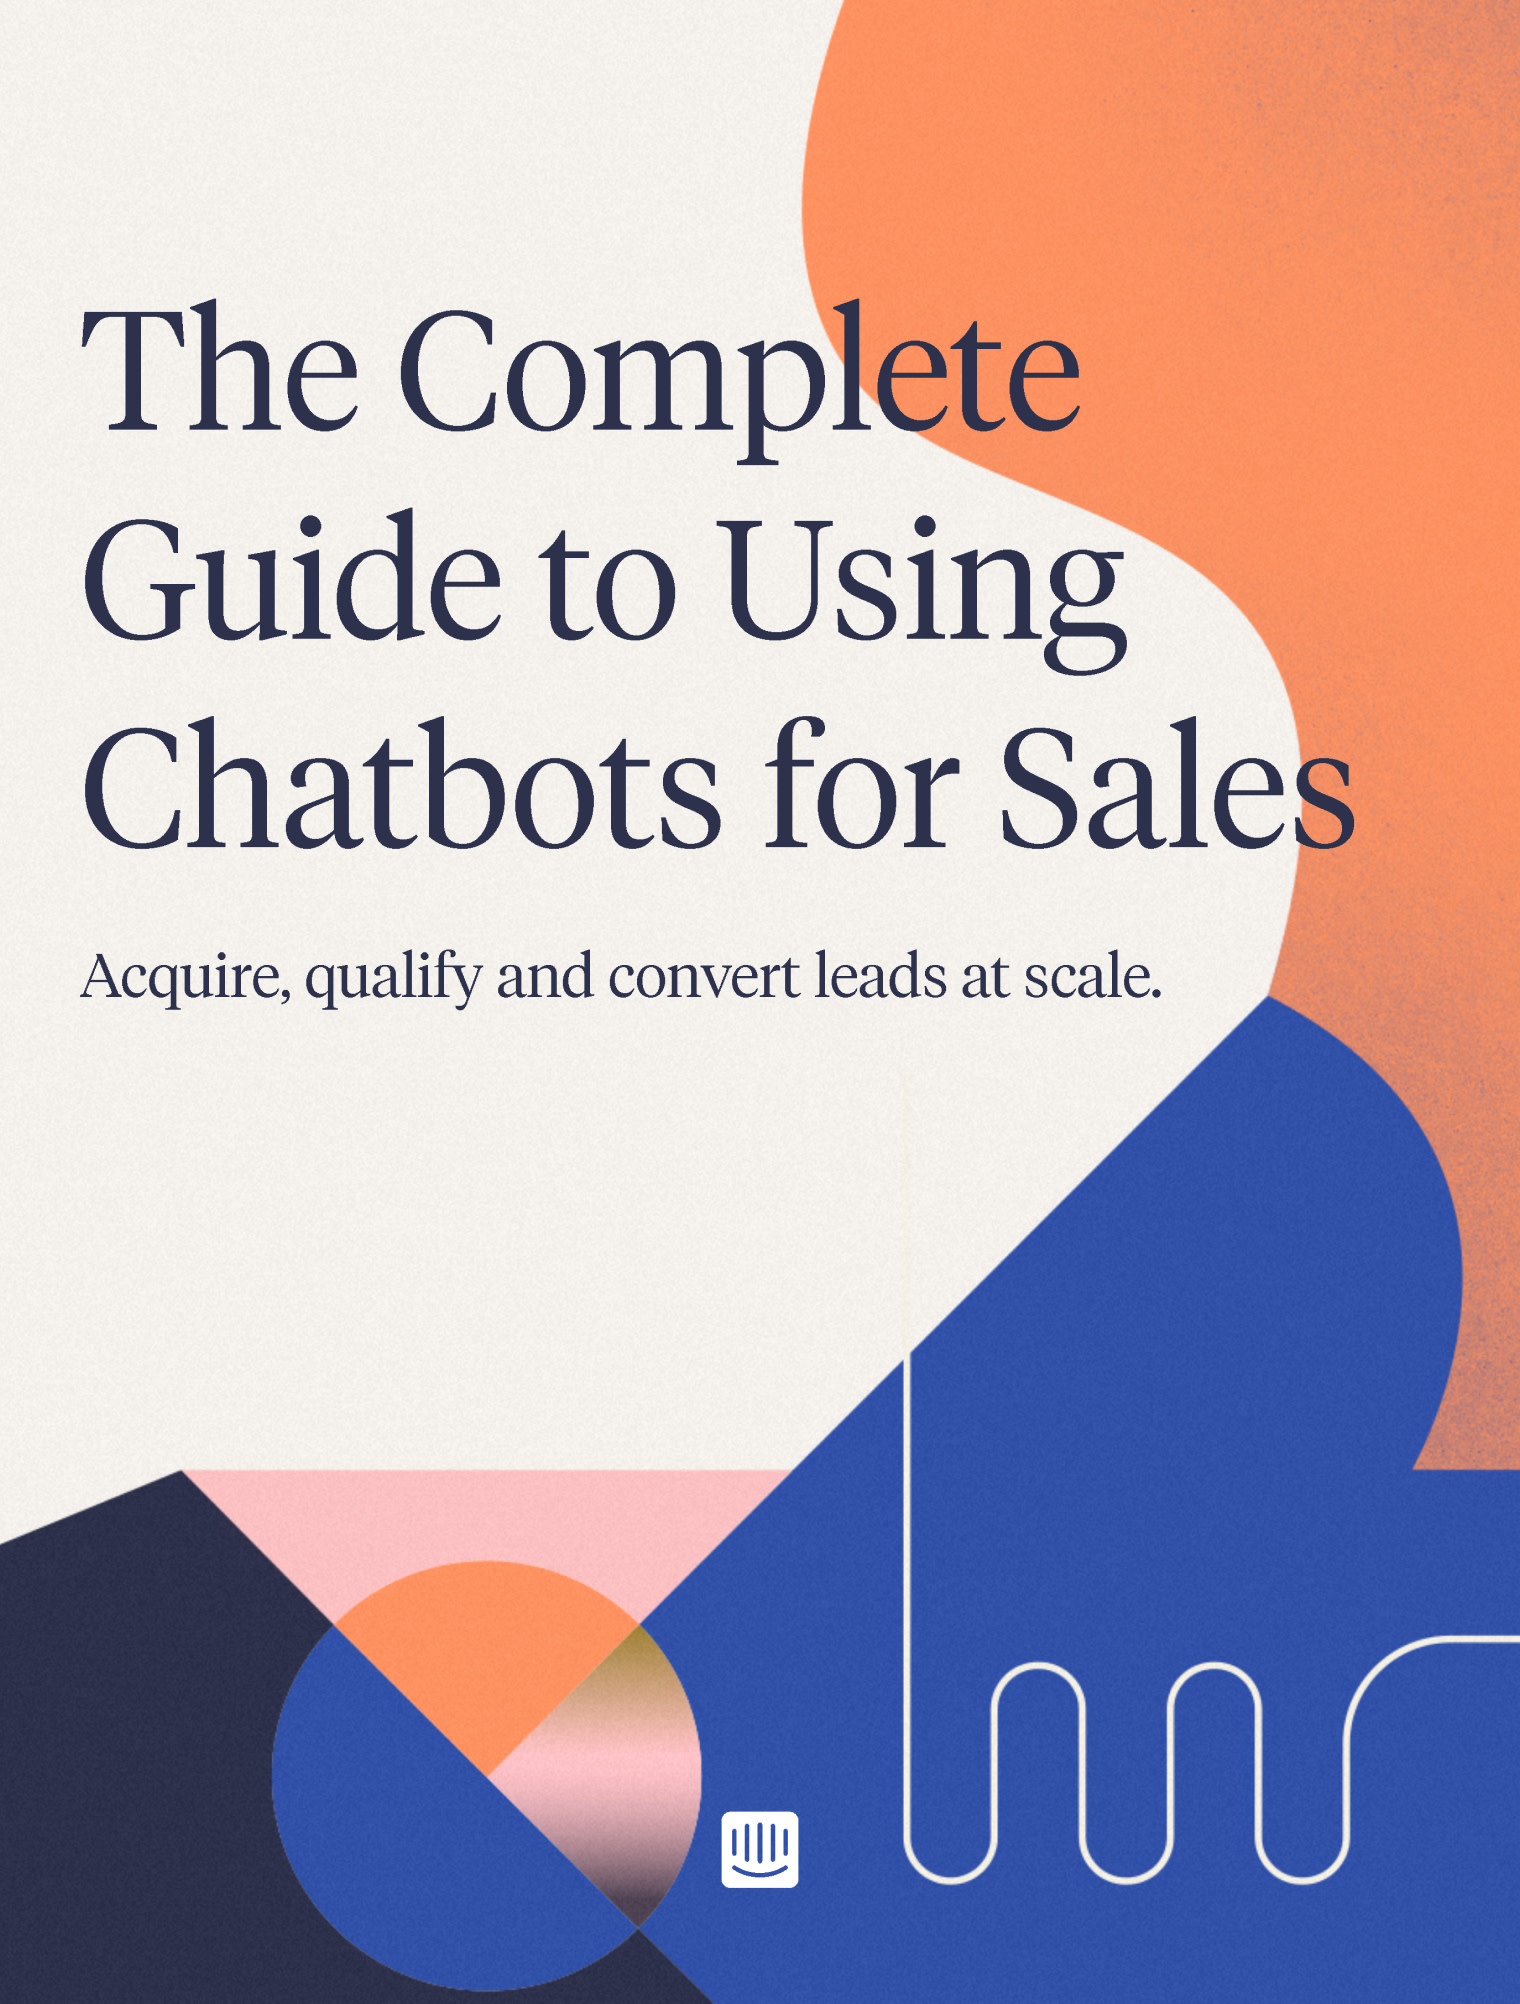 The Complete Guide to Website Chat Marketing and AI Chatbots